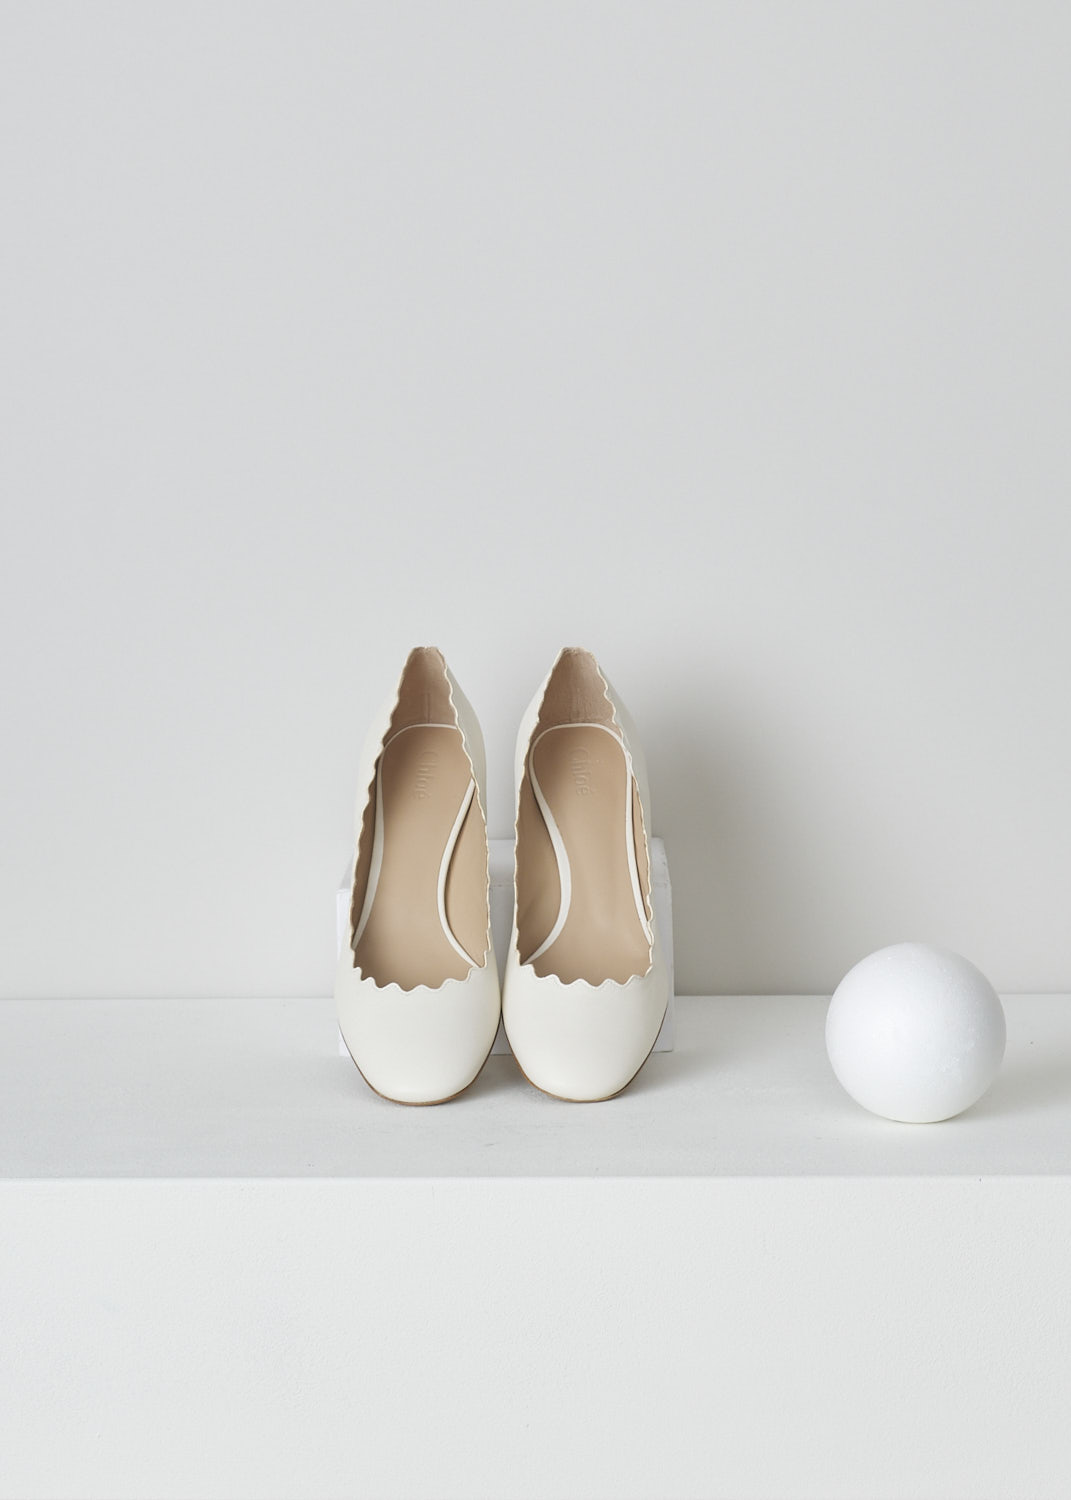 CHLOÃ‰, SCALLOPED LAUREN PUMPS IN CLOUDY WHITE, CHC16A23075121_CLOUDY_WHITE,  White, Top, White leather Lauren pumps featuring a sturdy block heel, round toe vamp and a scalloped top-line.
